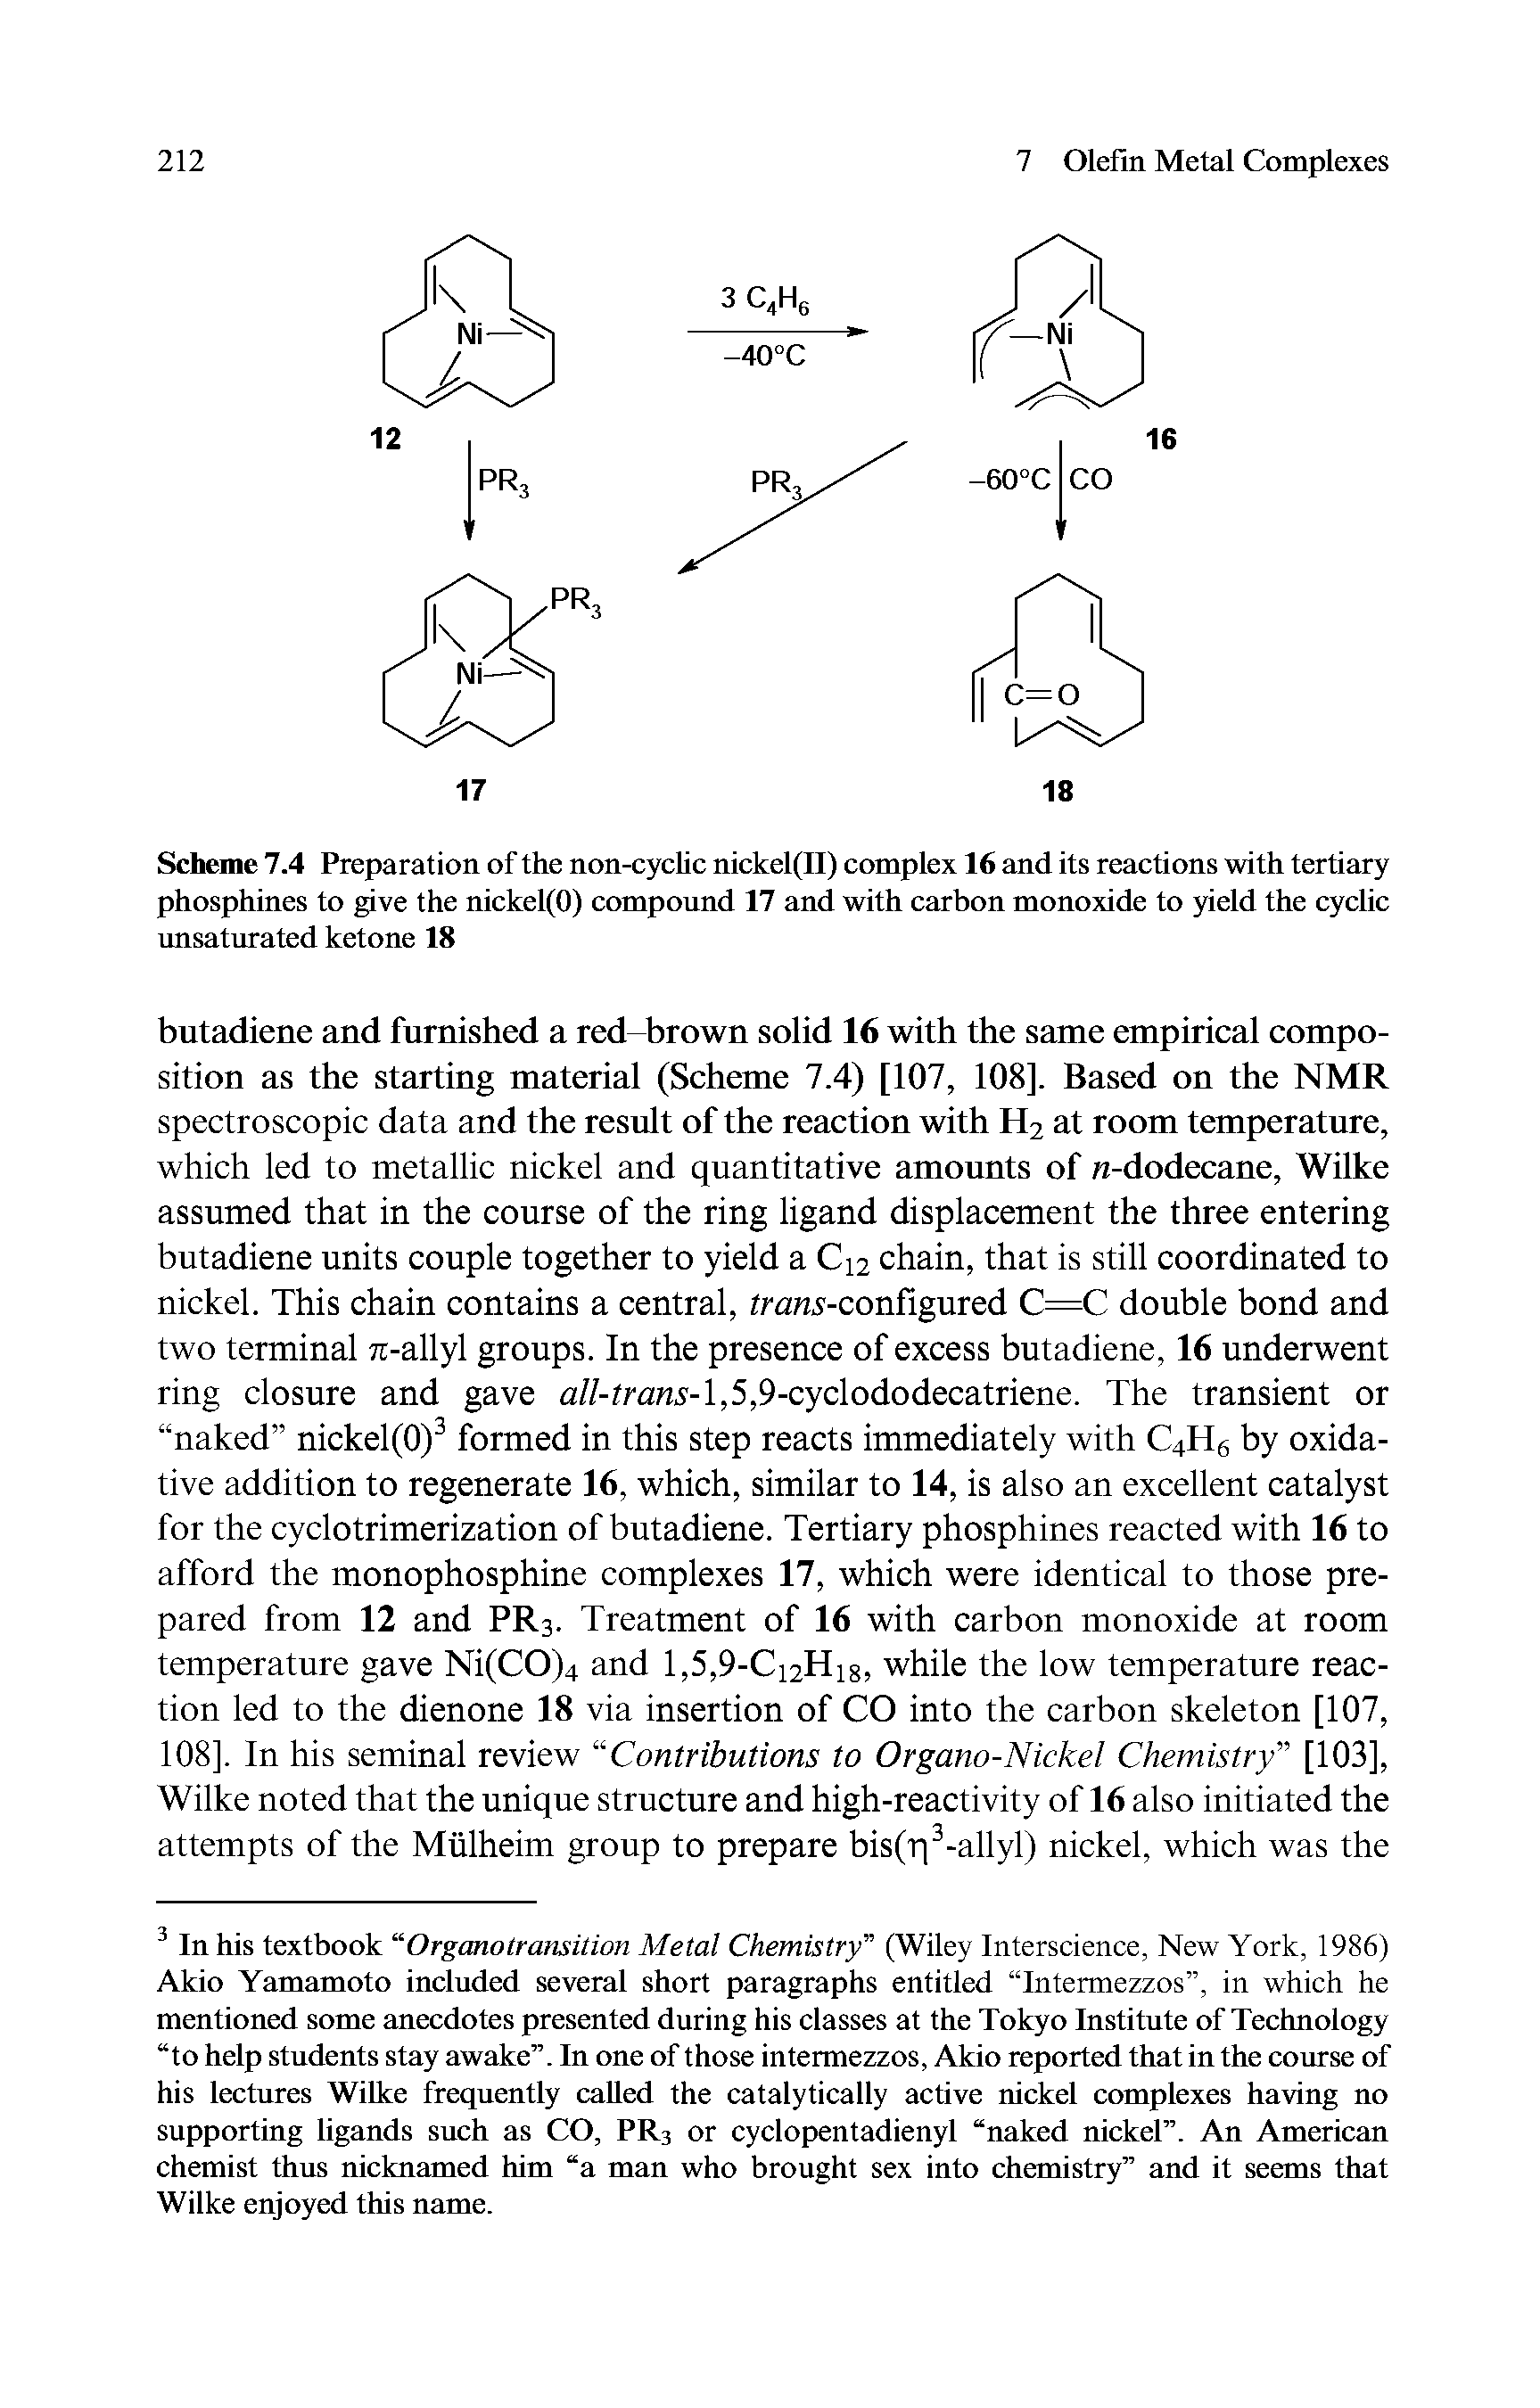 Scheme 7.4 Preparation of the non-cyclic nickel(II) complex 16 and its reactions with tertiary phosphines to give the nickel(O) compound 17 and with carbon monoxide to yield the cyclic unsaturated ketone 18...